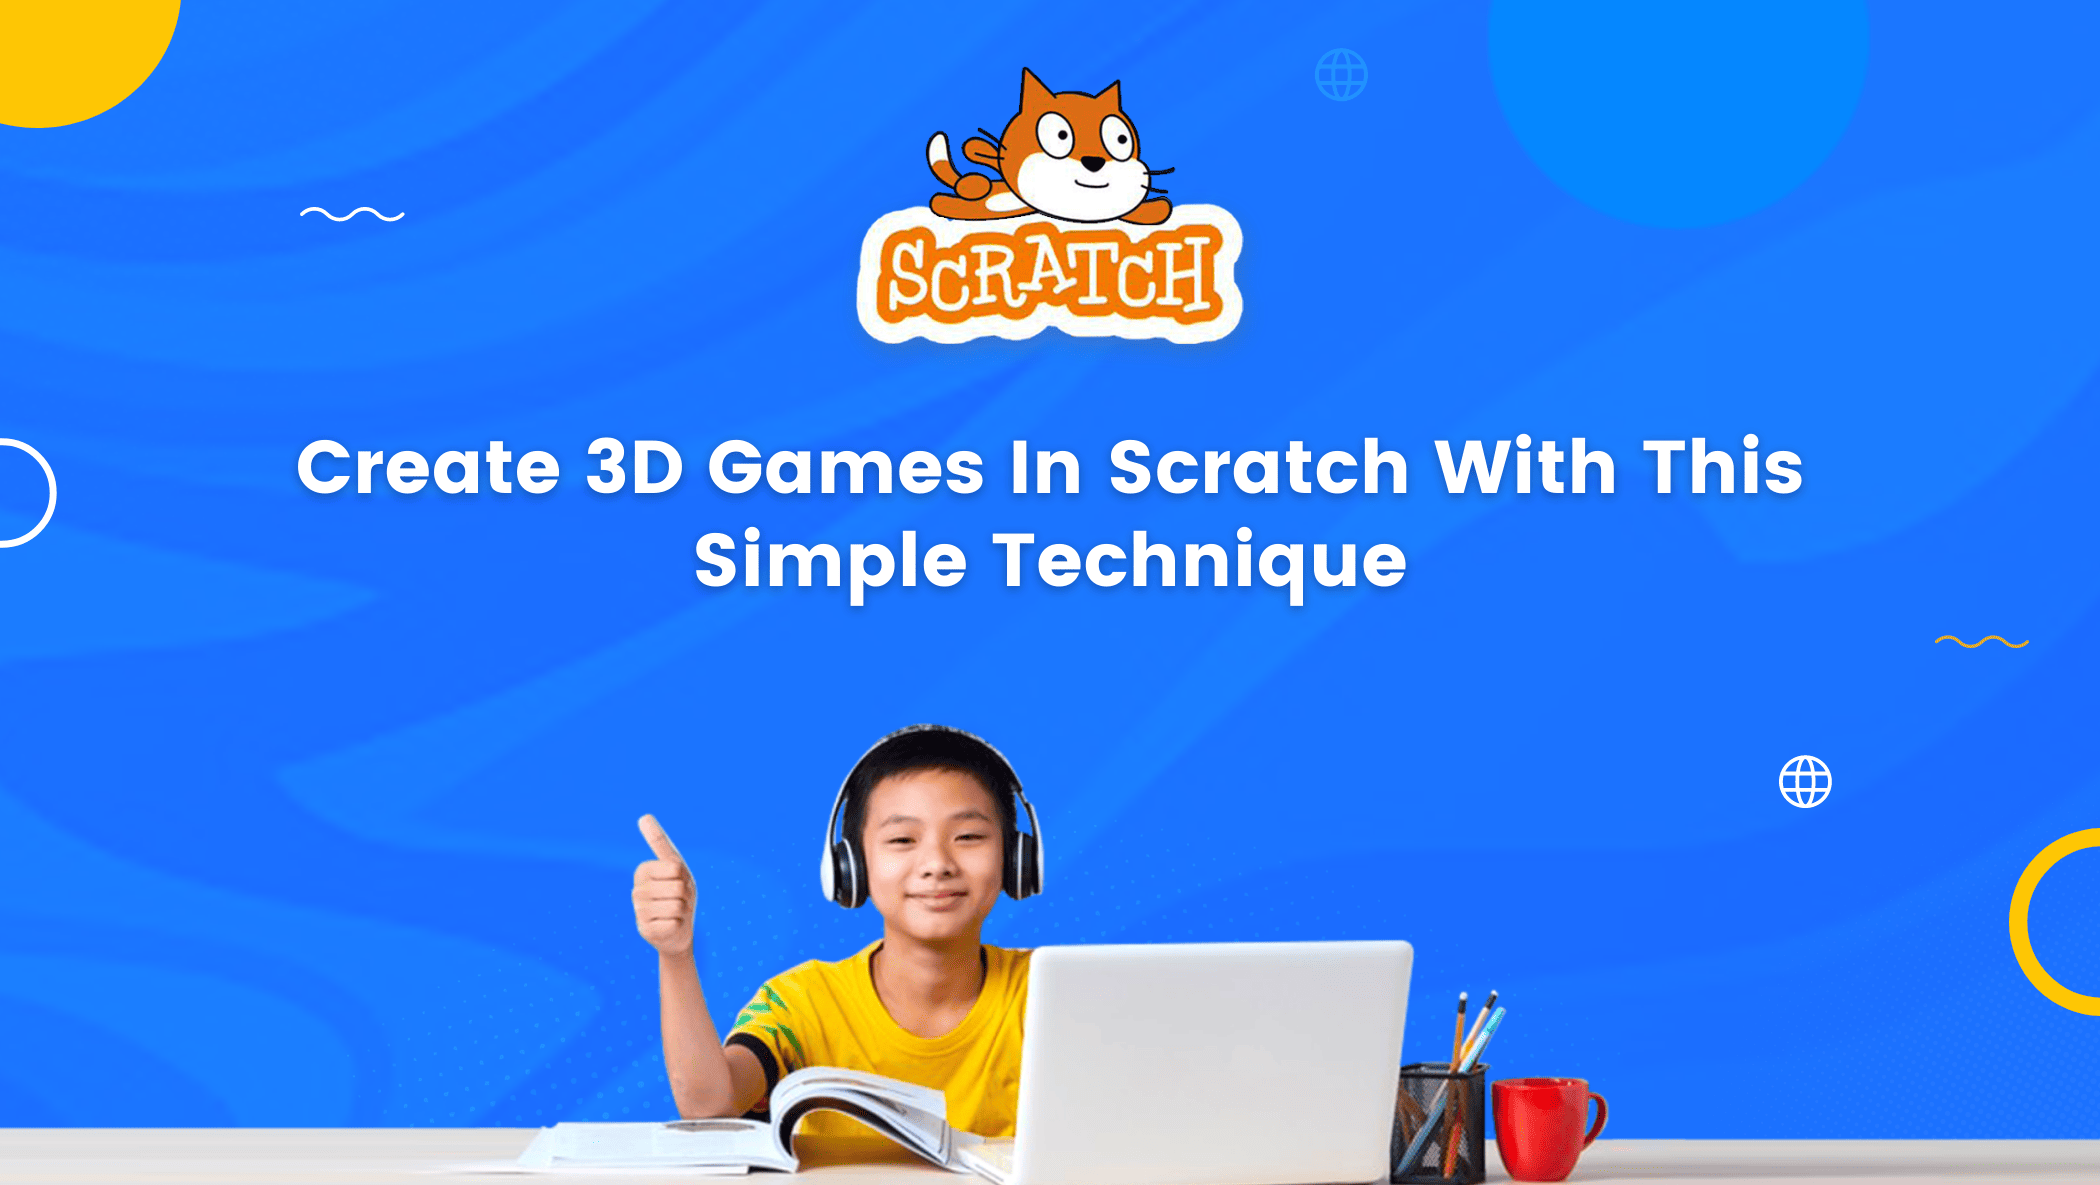 Create 3D Games In Scratch With This Simple Technique